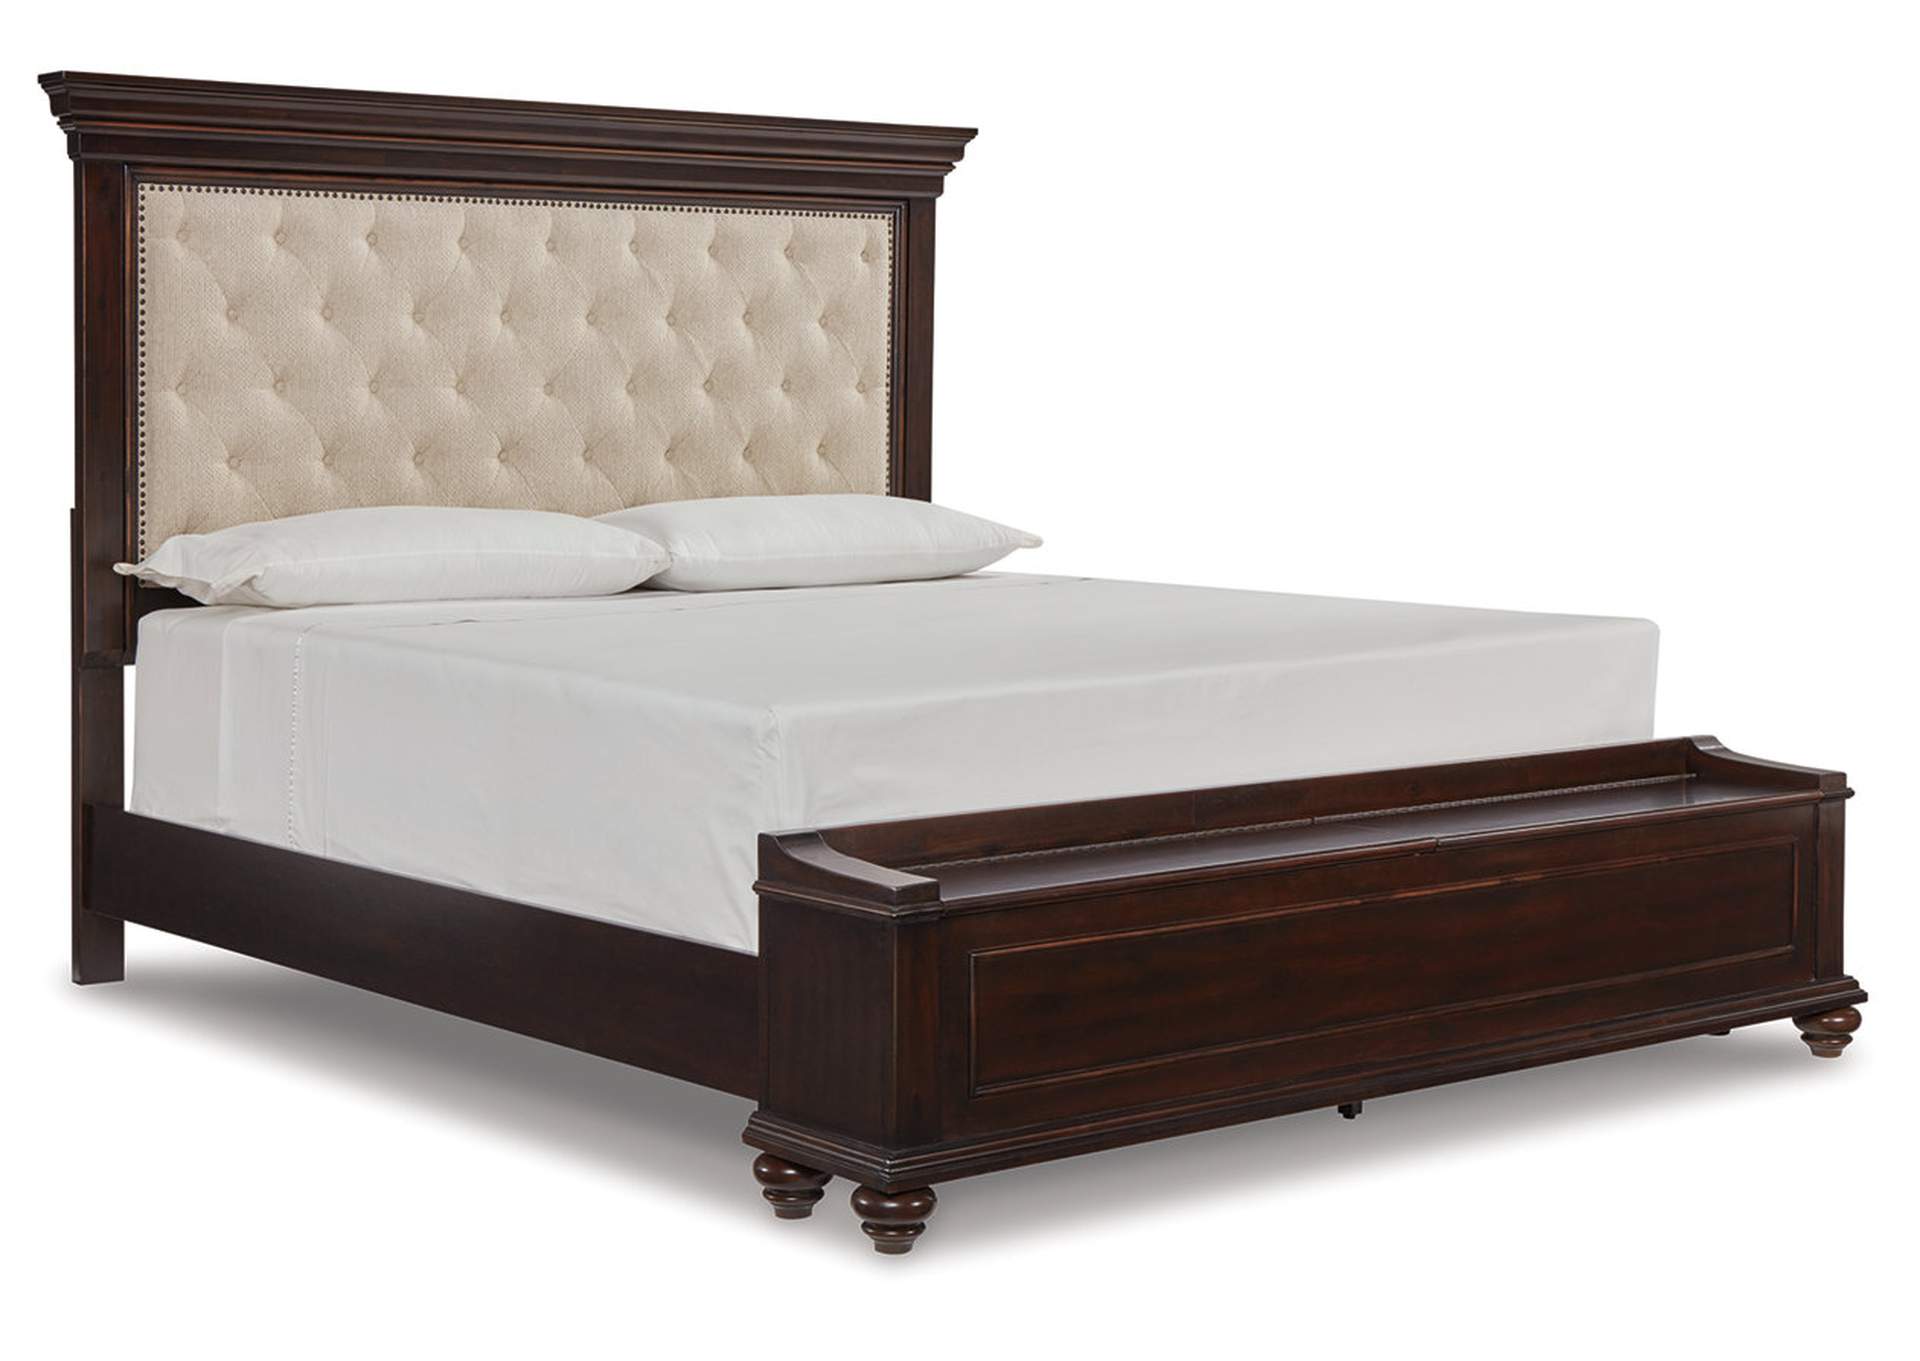 Brynhurst Queen Upholstered Bed with Storage Bench,Signature Design By Ashley